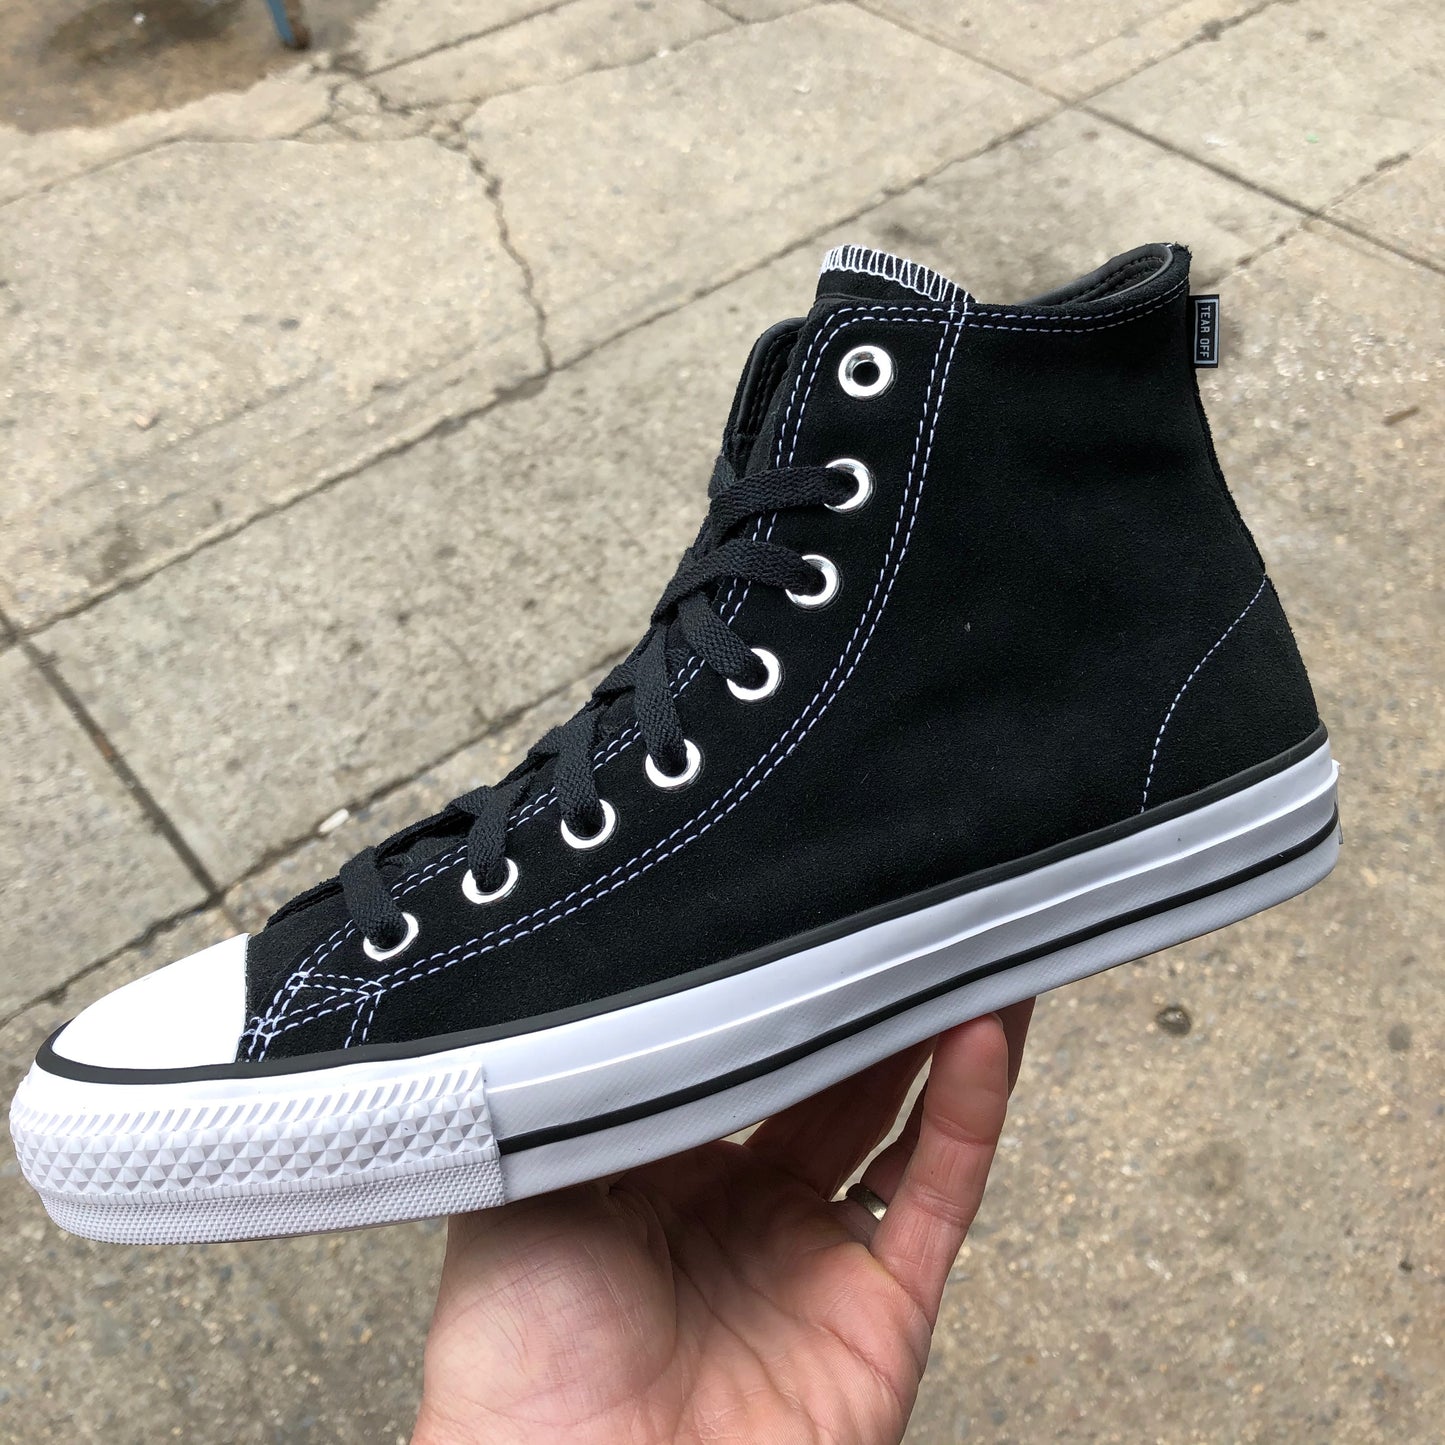 black hi top sneaker with white sole and toe, side view